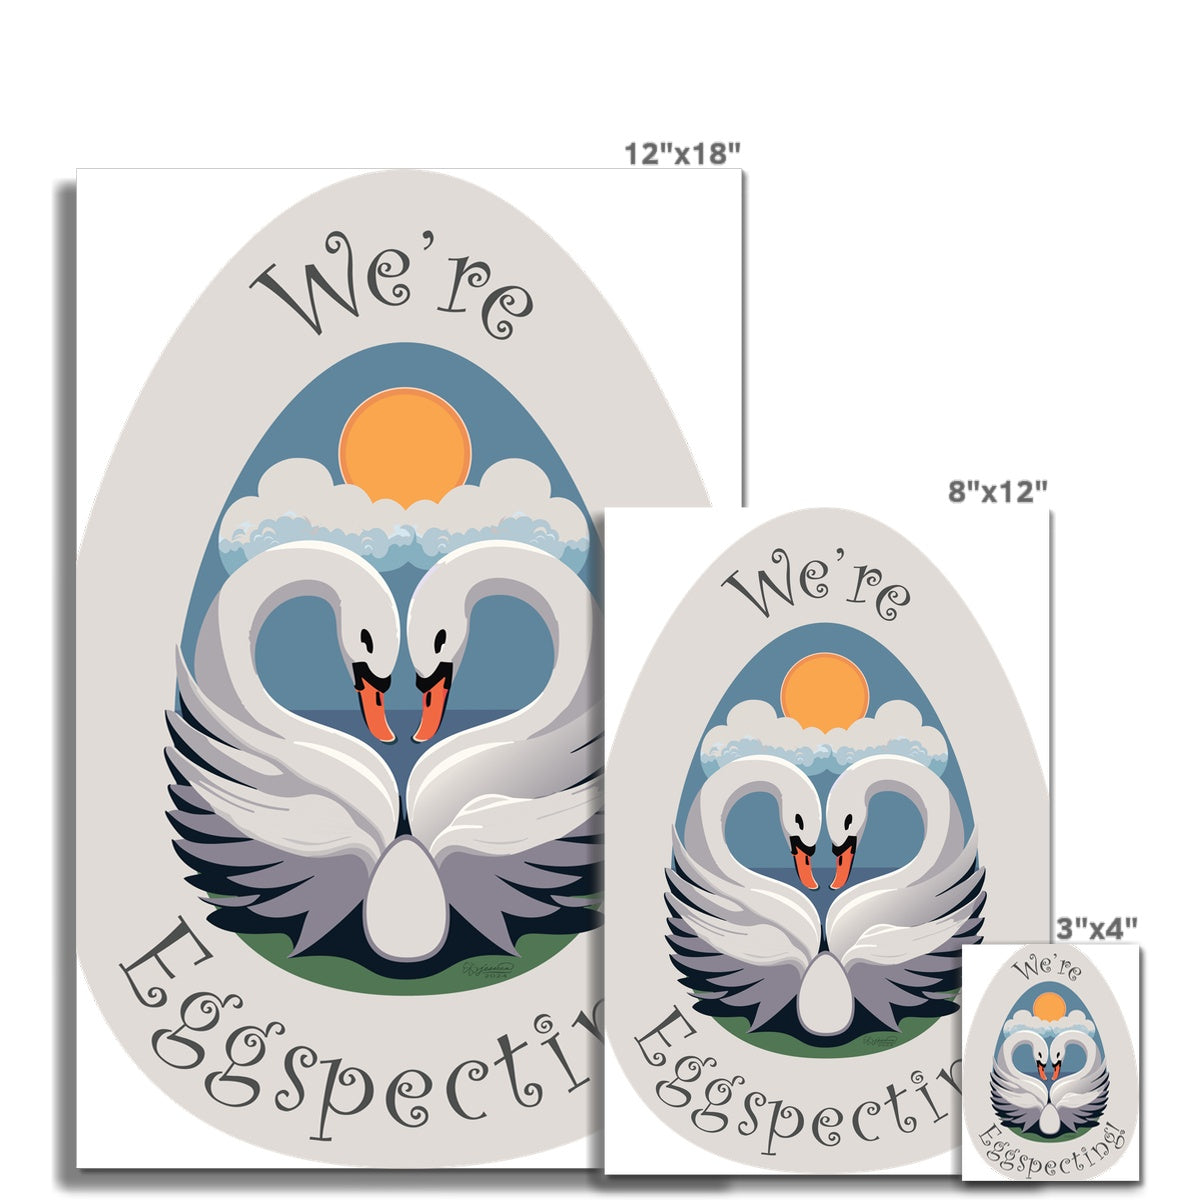 Capture the Joy with Our Exquisite "We're Eggspecting!" Swan Print